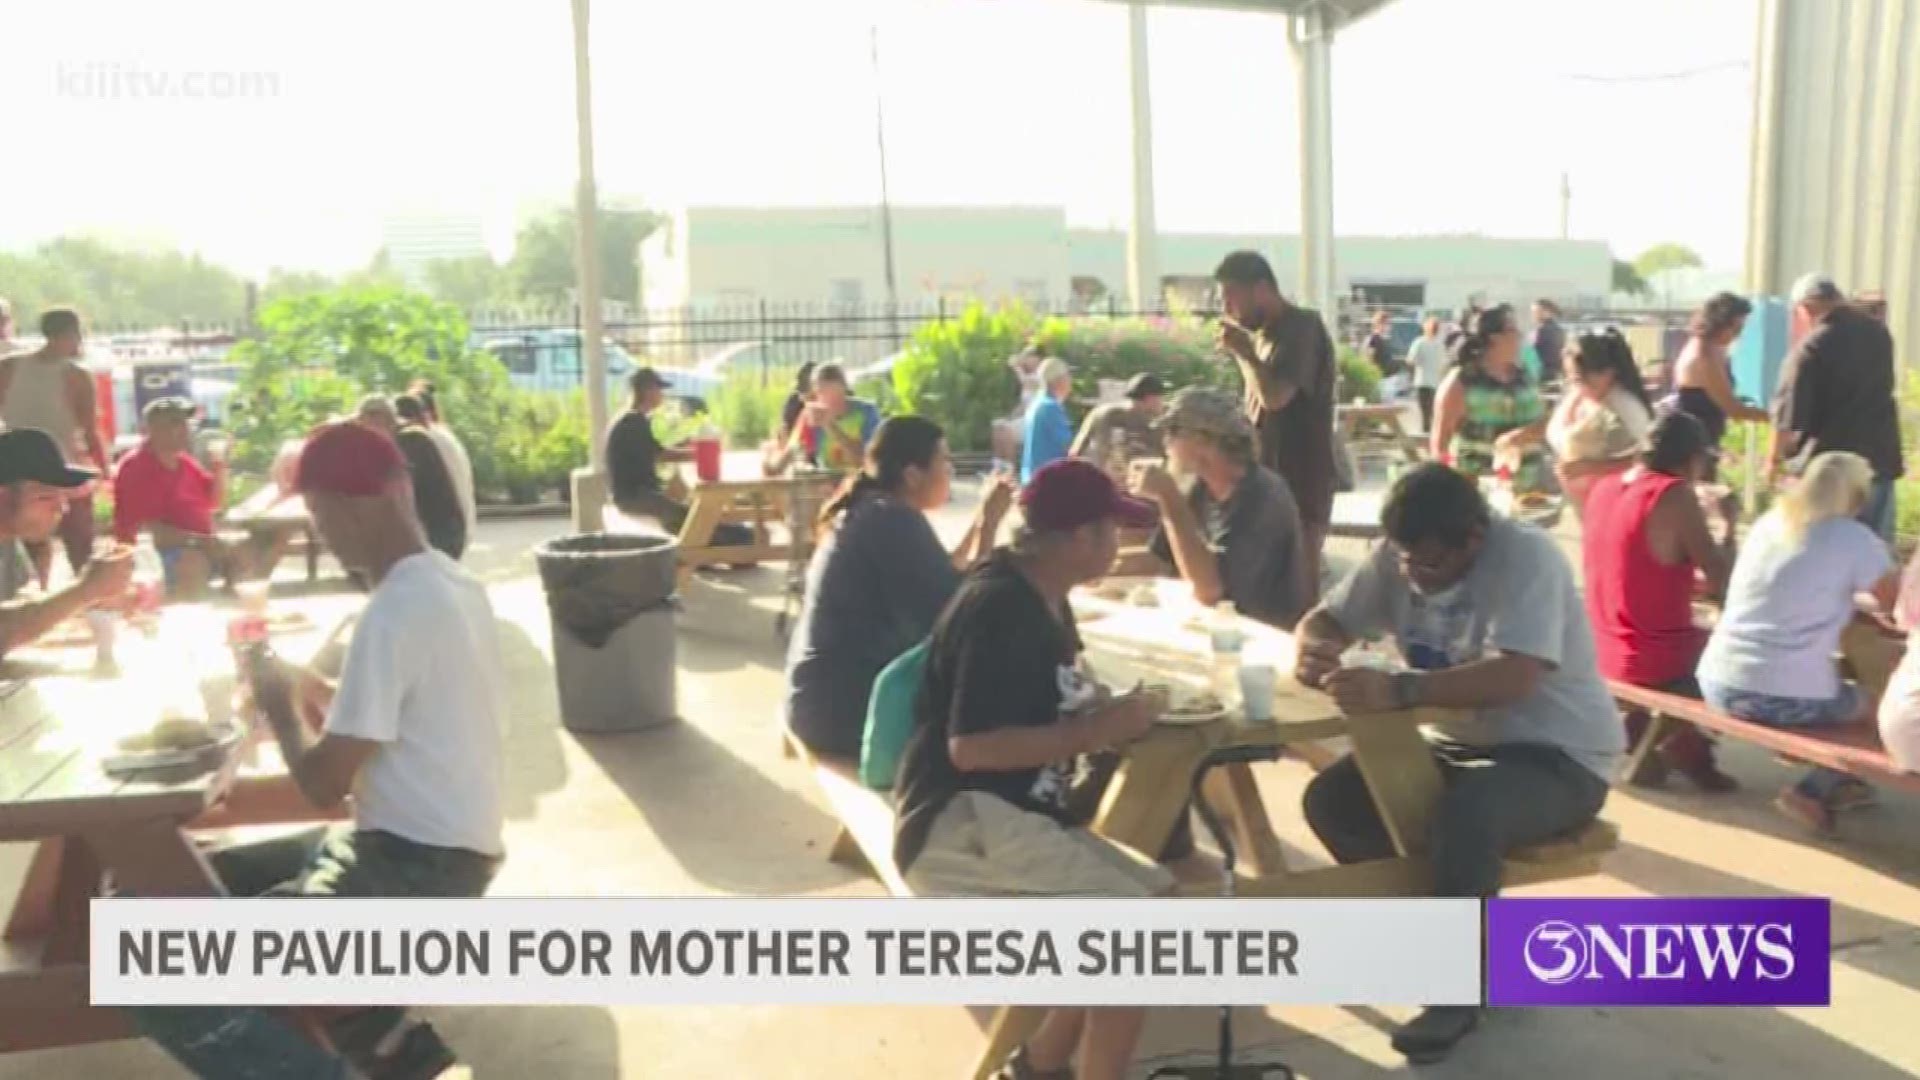 The Mother Teresa Shelter has reopened for those in need and they are even more prepared to fight off harsh weather after constriction of a new covered pavilion was completed Tuesday.